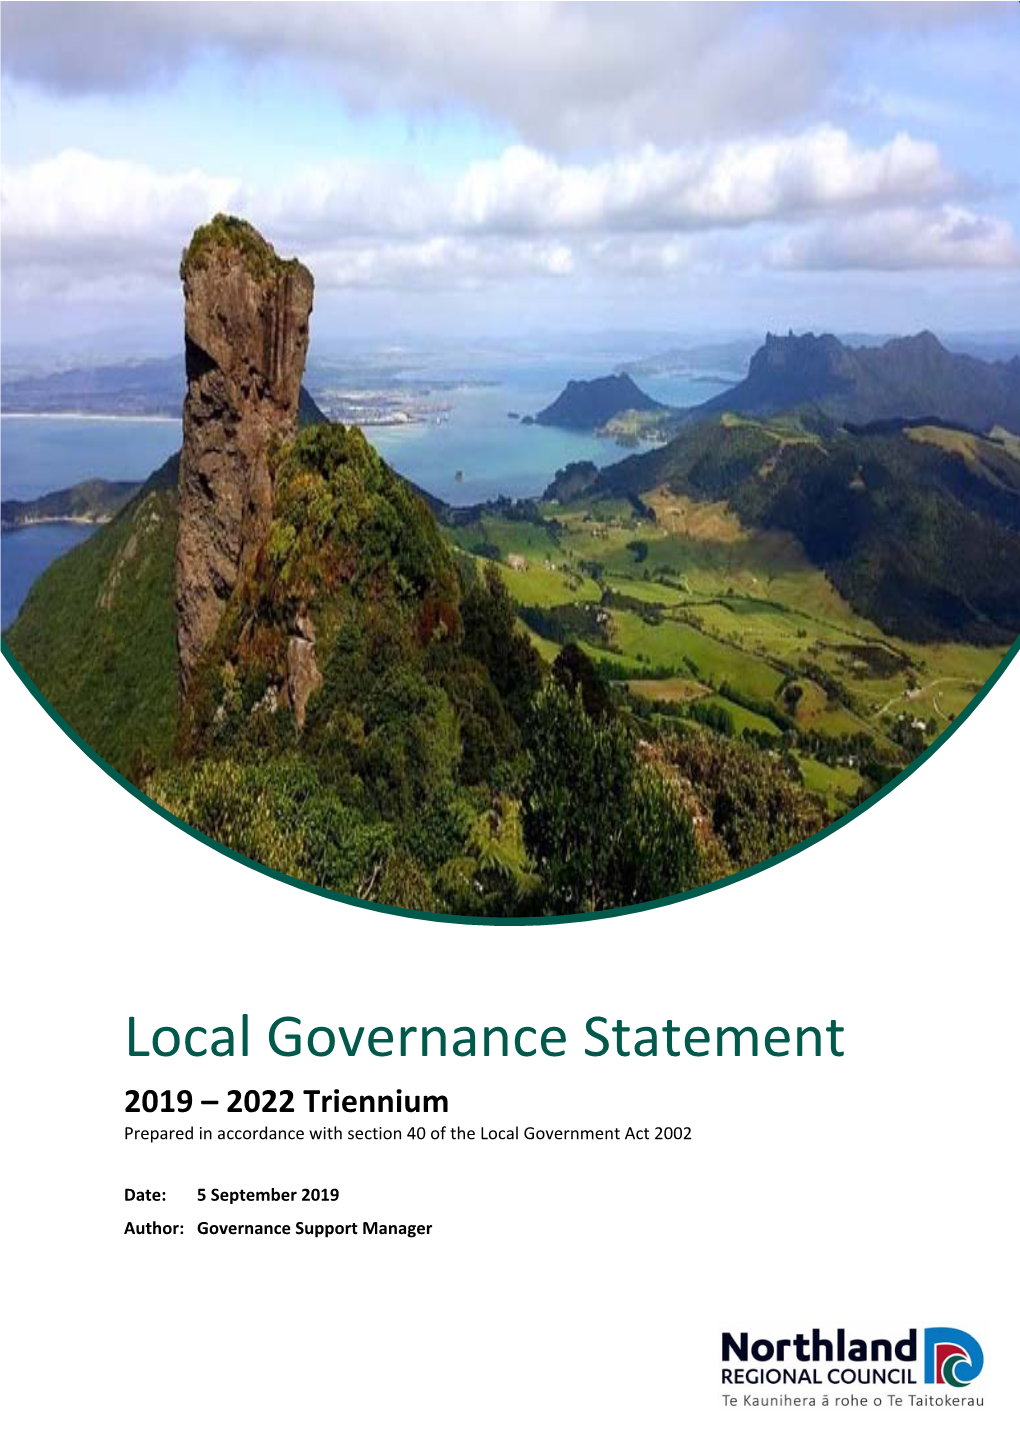 Local Governance Statement 2019 – 2022 Triennium Prepared in Accordance with Section 40 of the Local Government Act 2002